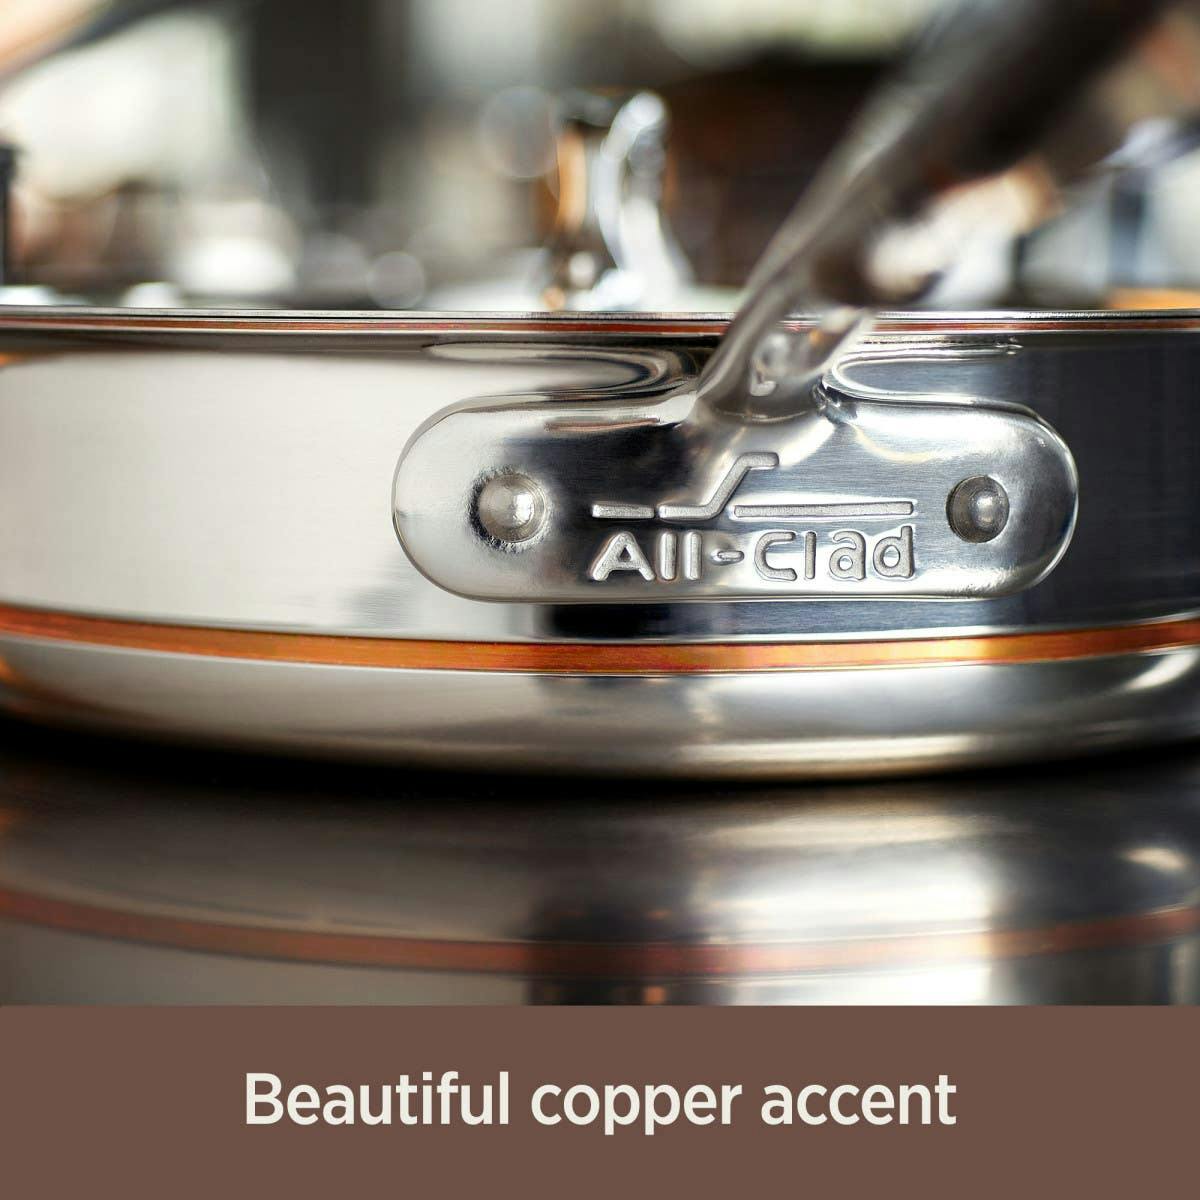 All-Clad All-Clad Copper Core 14-Piece Cookware Set